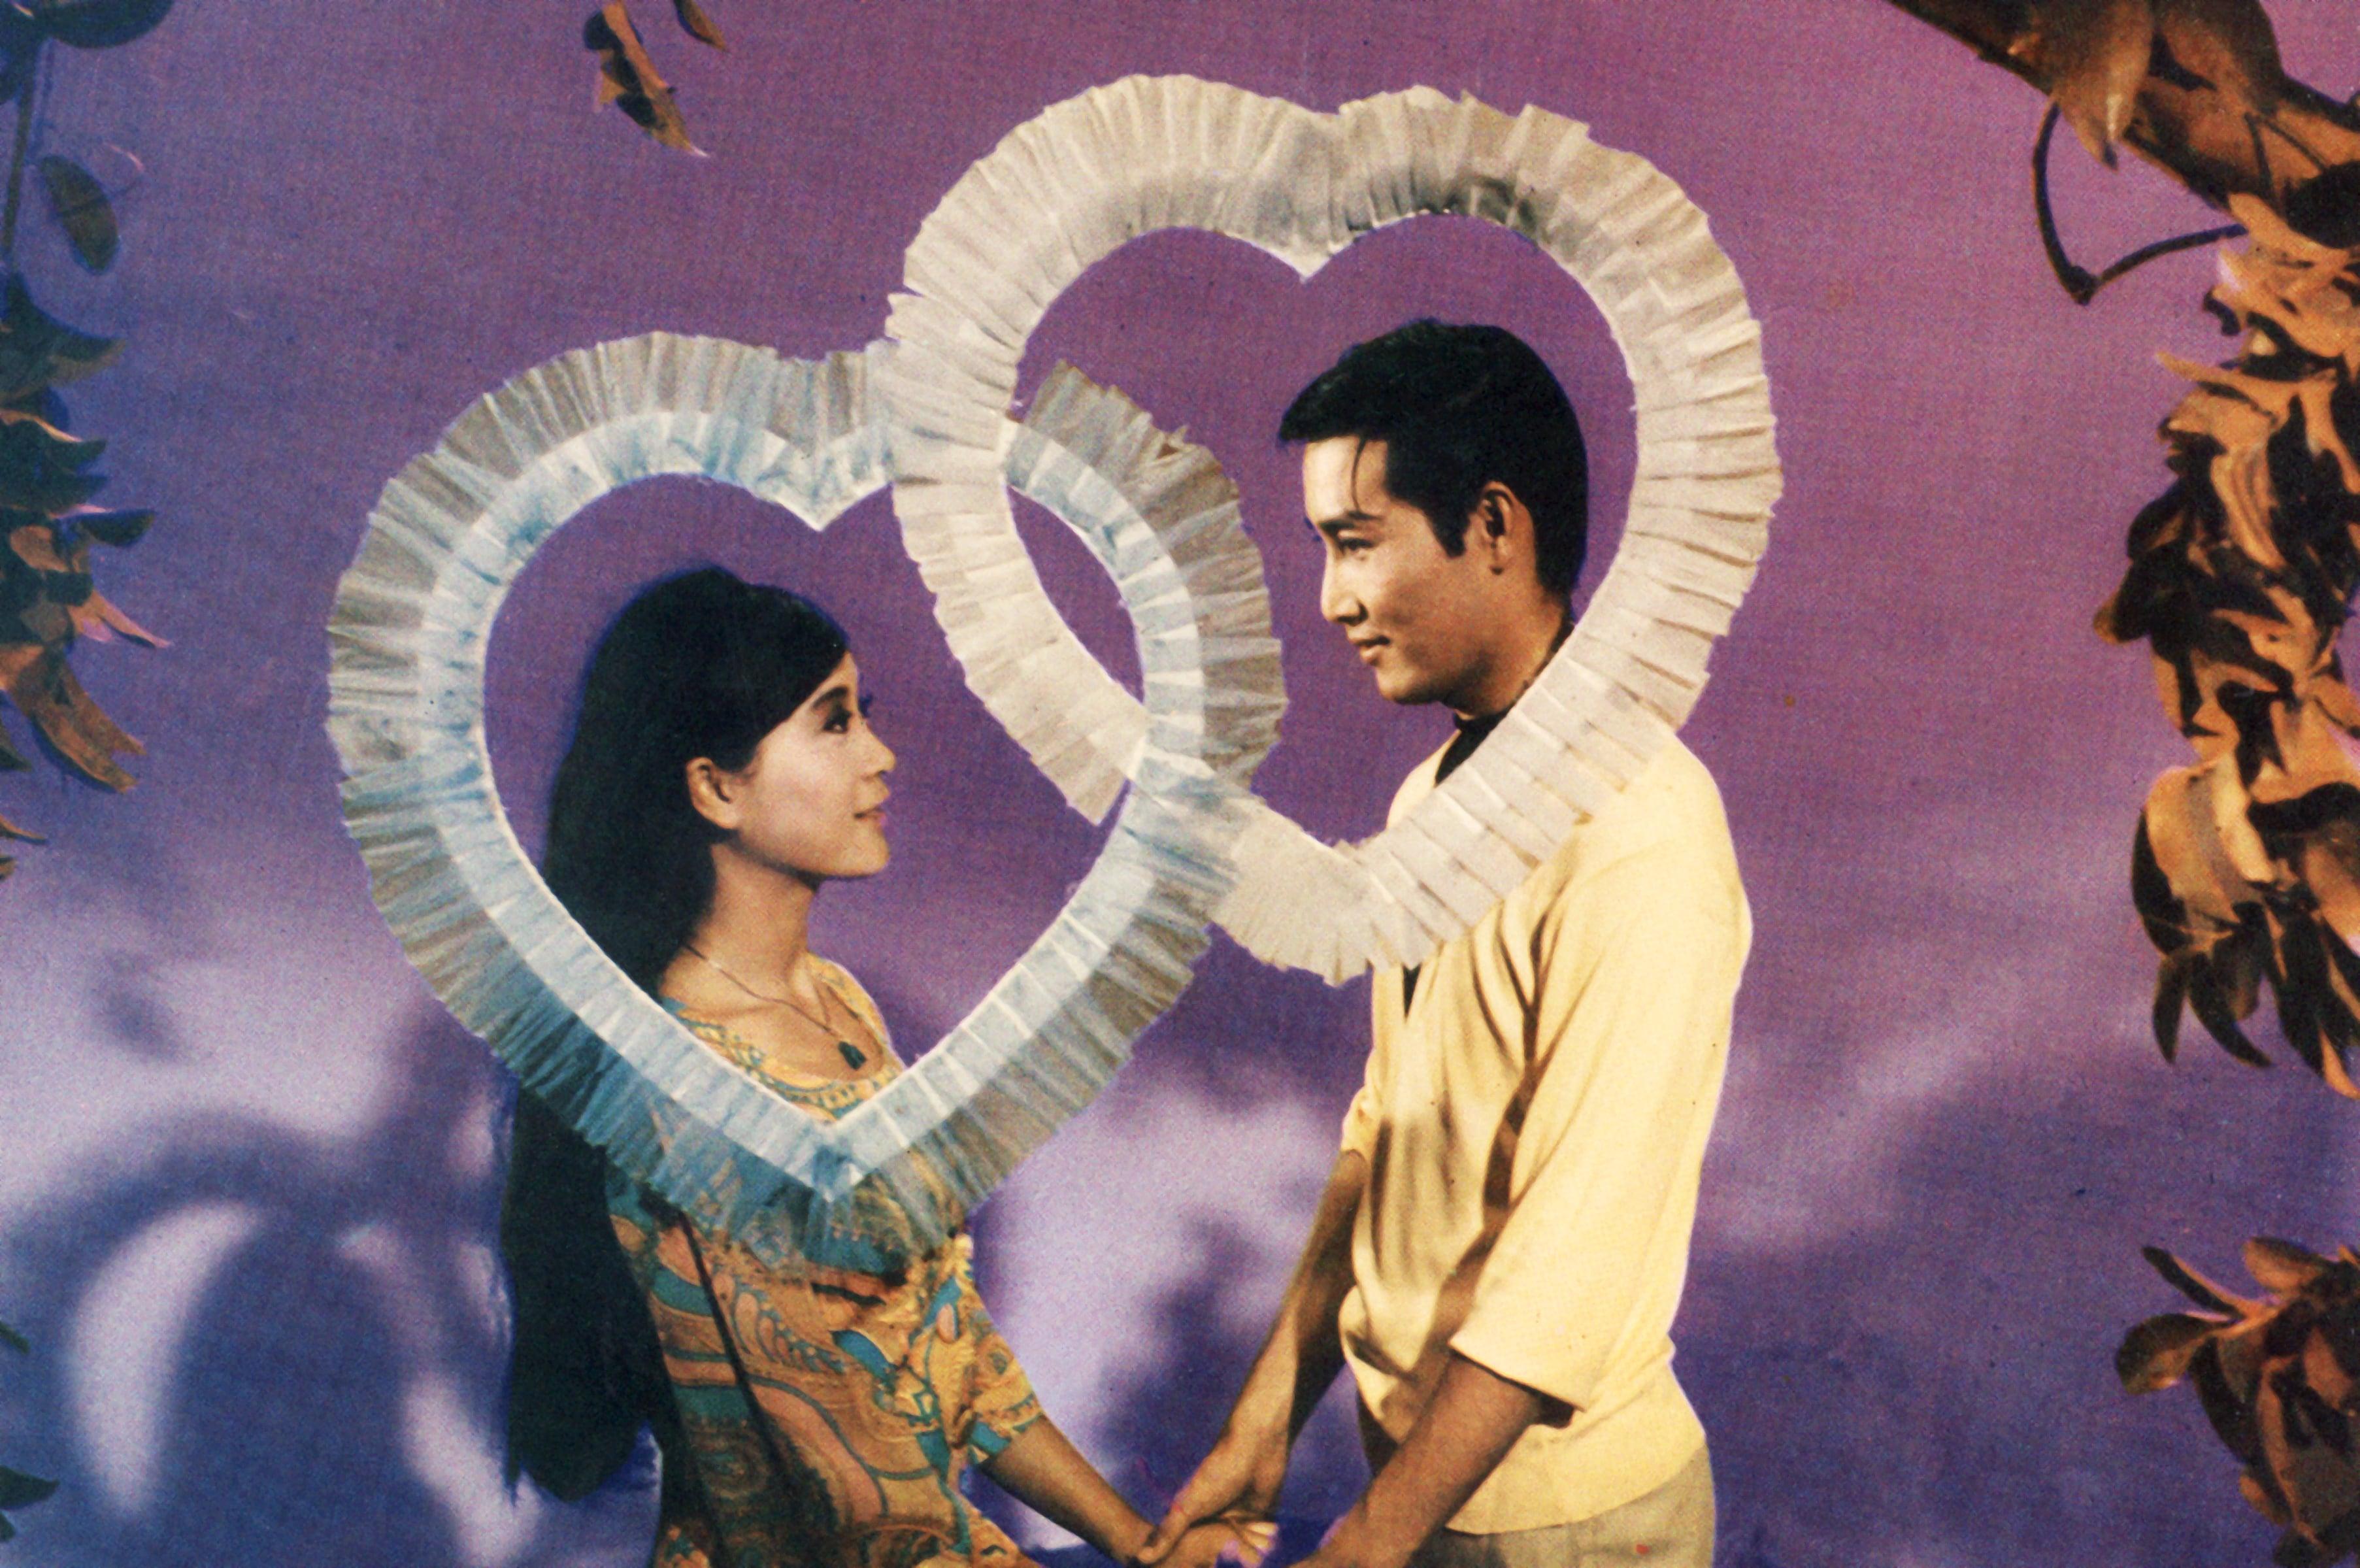 Launched by the Hong Kong Film Archive of the Leisure and Cultural Services Department, the "Movies to GO" series will collaborate with Tai Kwun to present "Tai Kwun Movie Steps X Hong Kong Film Archive - A Touch of Youth". Five teen films from the 1950s to 1980s will be screened free of charge on eight consecutive Sundays between September 10 and October 29 at the Tai Kwun Laundry Steps to allow audiences to revisit the charisma of the teen idols of the time. Photo shows a film still of "Mary, I Love You" (1969).